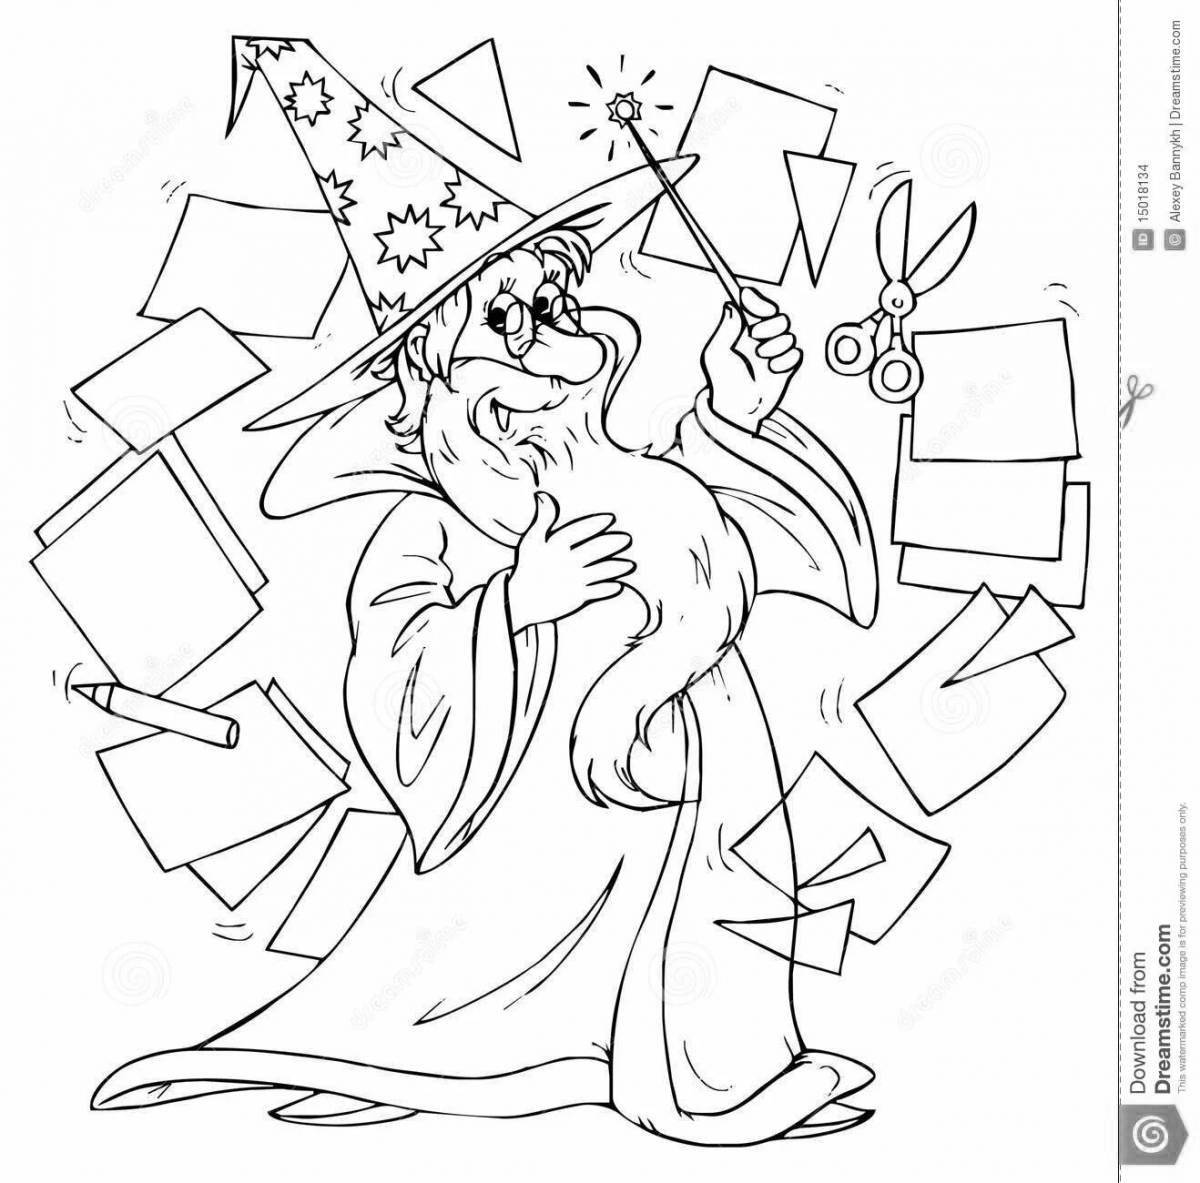 Coloring book amazing wizard